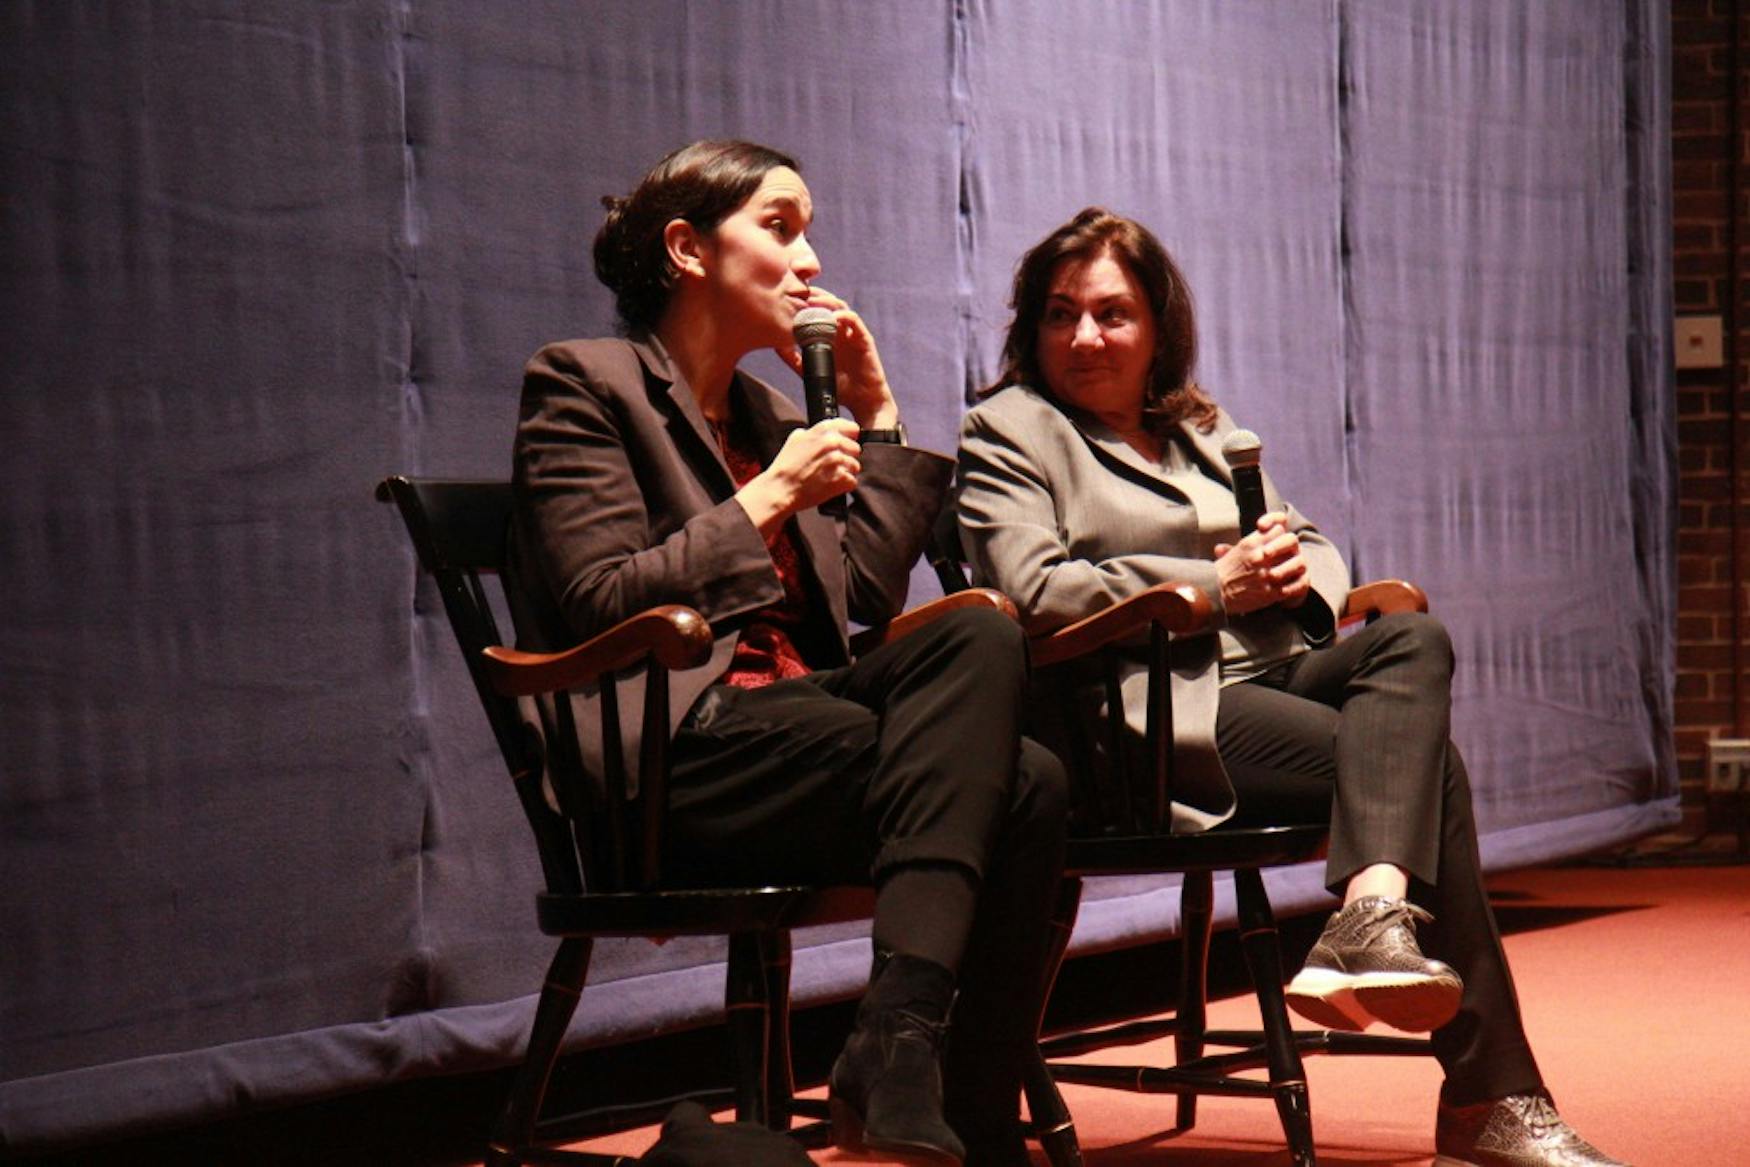 WOMEN IN POWER: Sarah Gavron answered questions about being a female director and about women’s rights in a talkback after a pre-theatrical early screening of her film “Suffragette.”